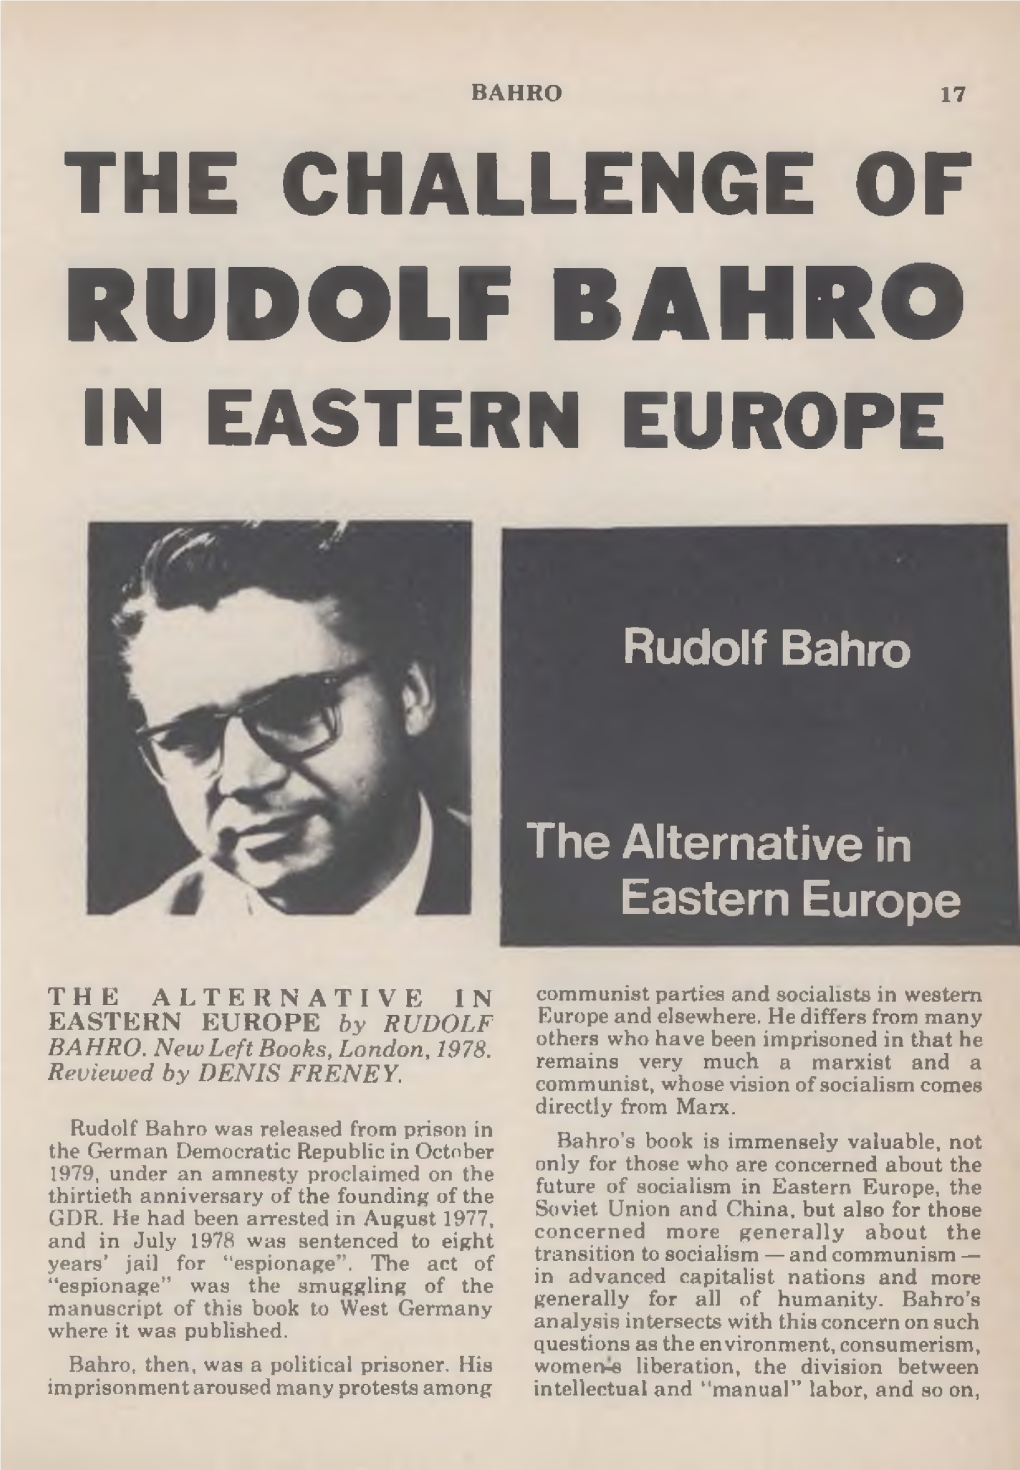 The Challenge of Rudolf Bahro in Eastern Europe